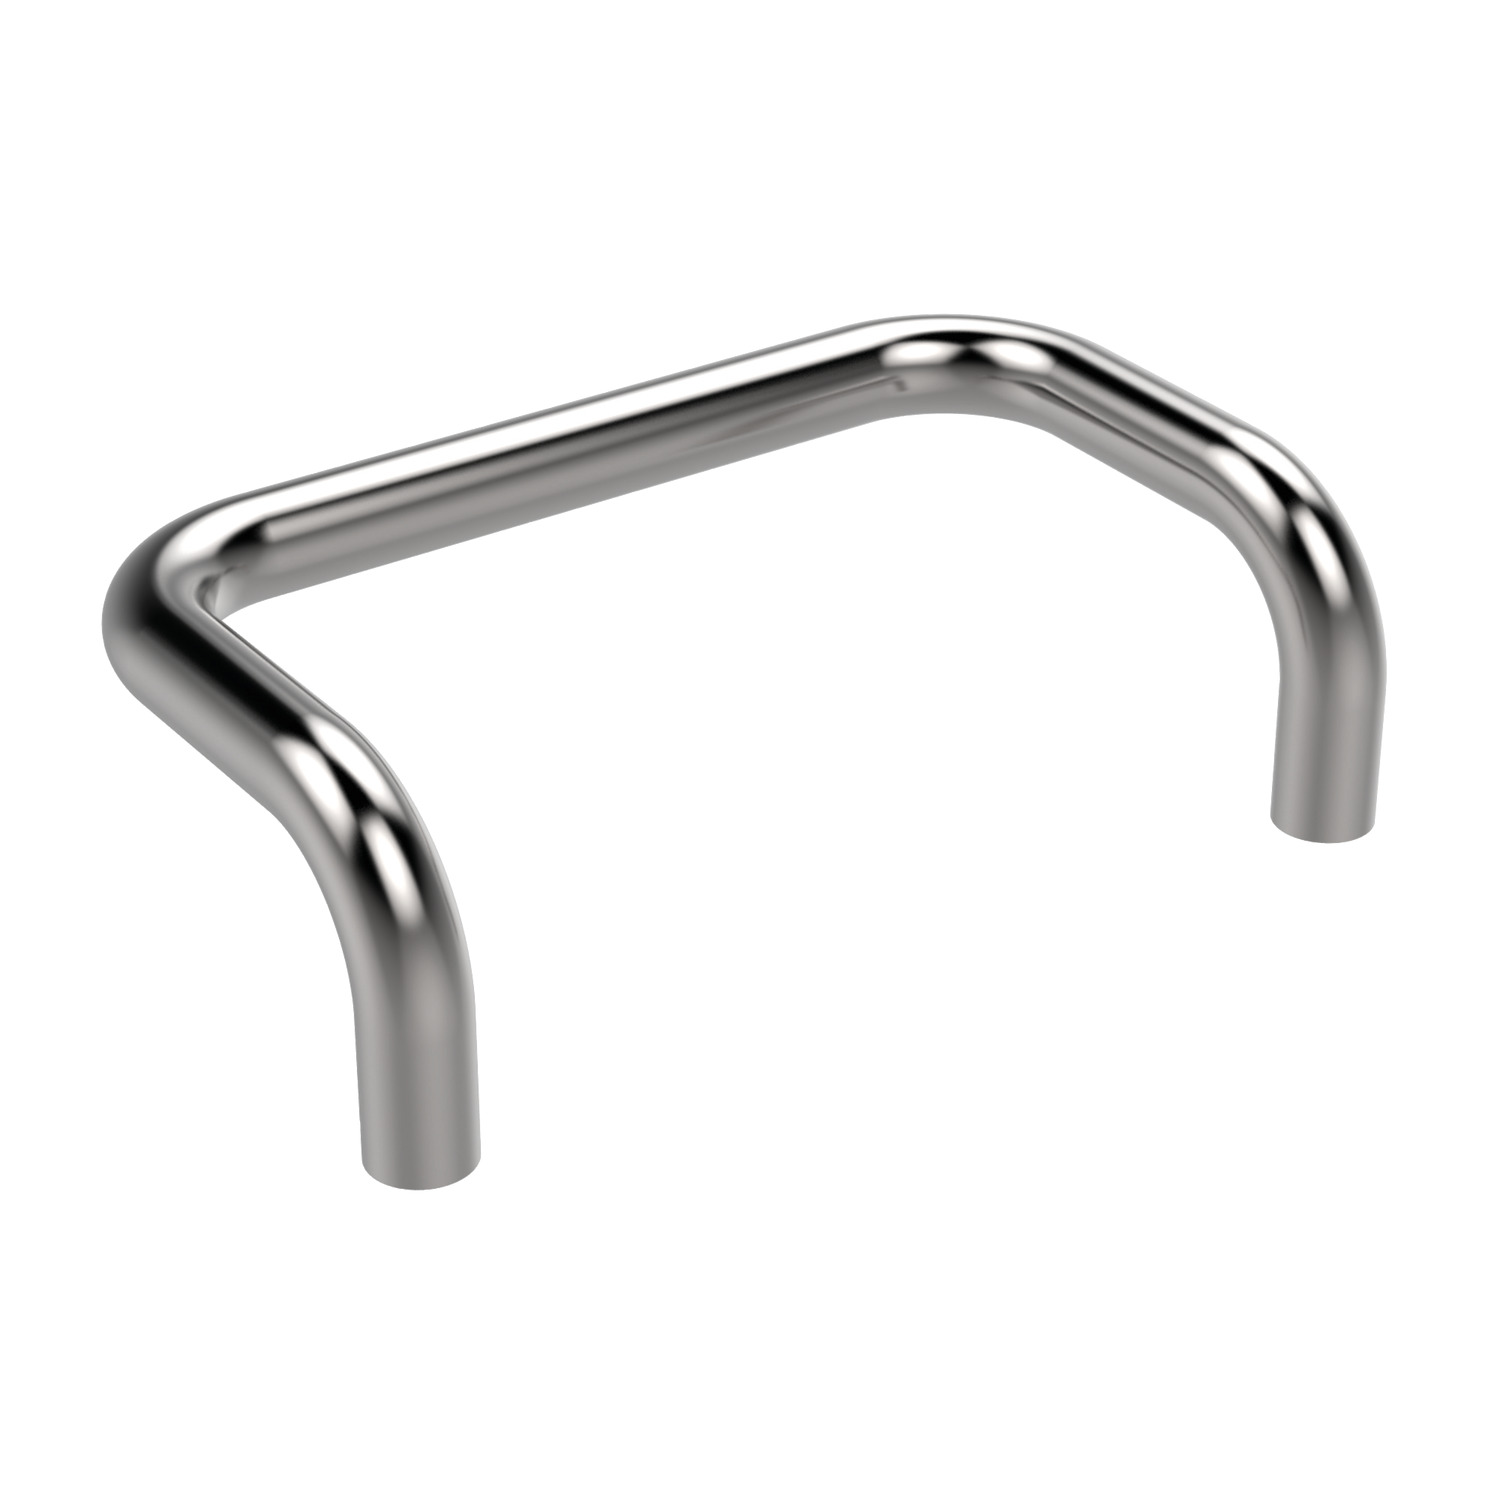 Product 78760, Pull Handles - Cranked steel / 